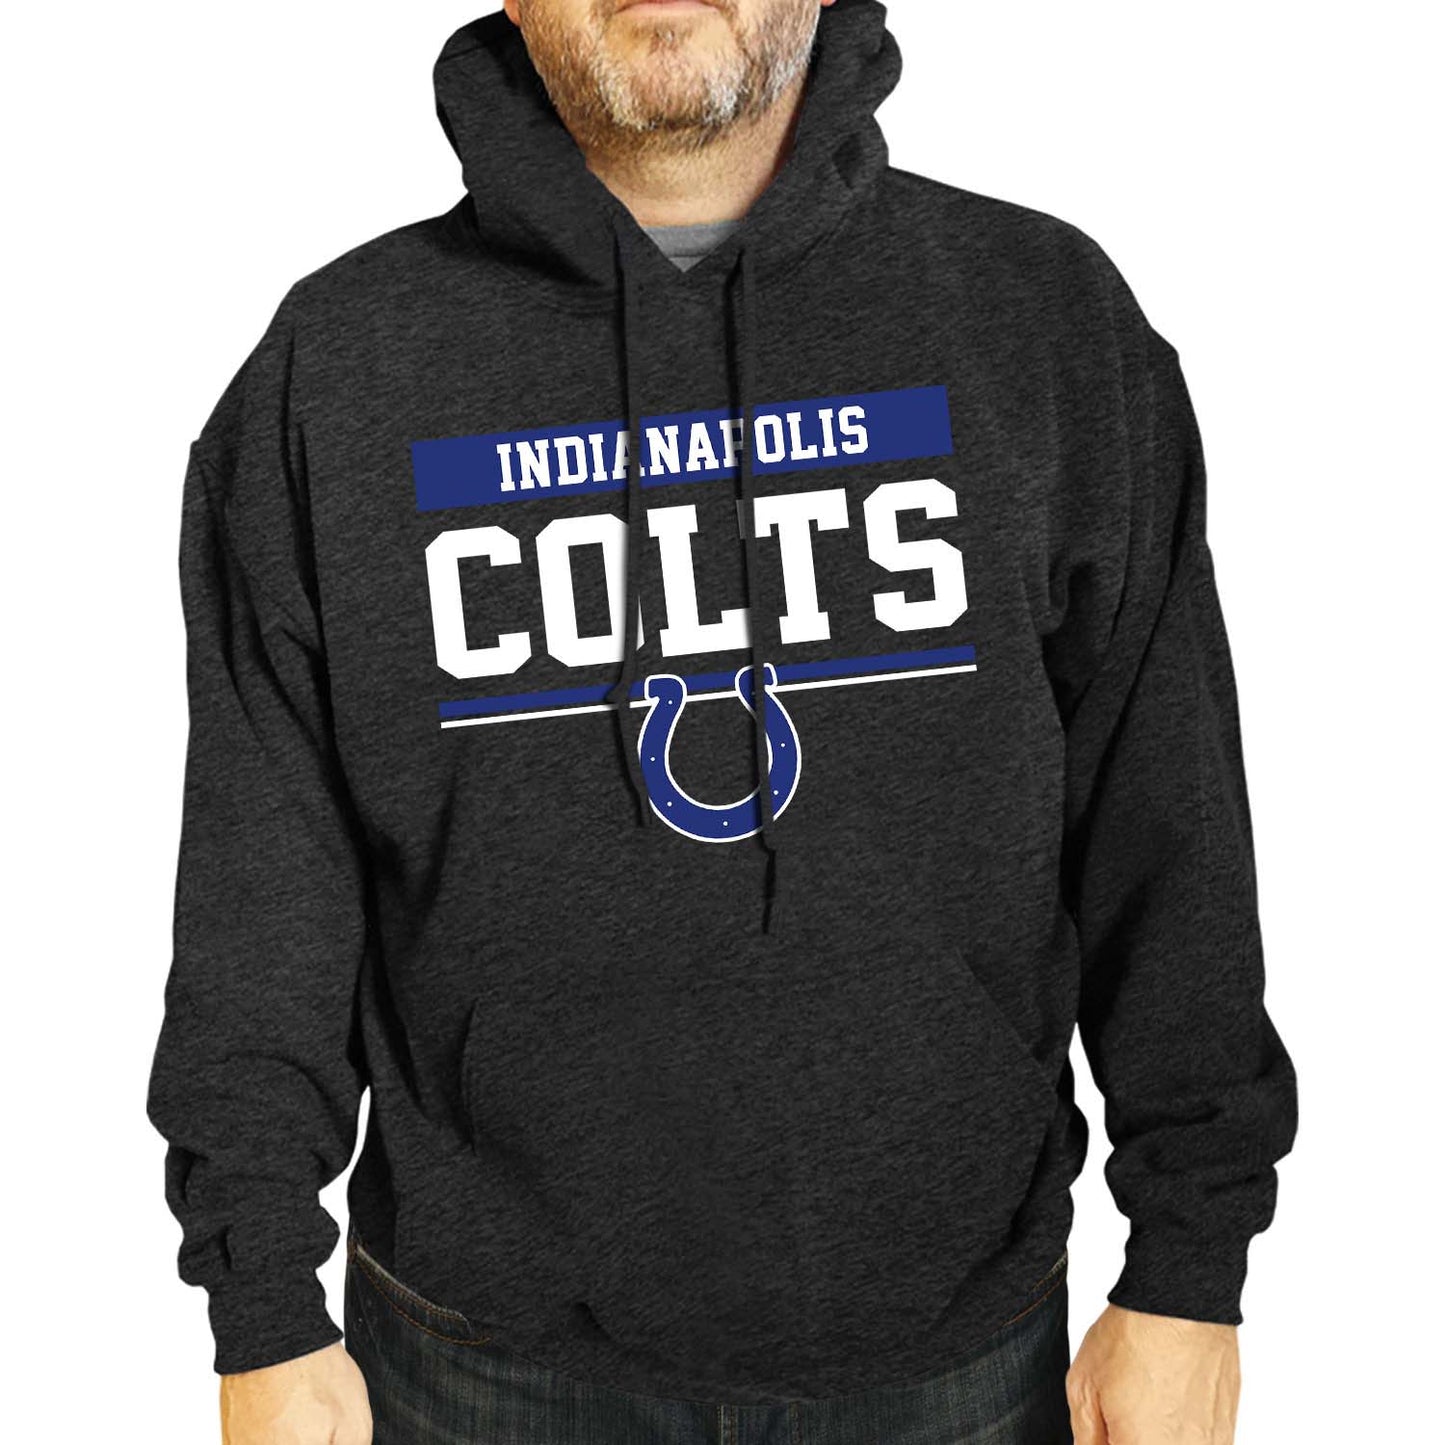 Indianapolis Colts NFL Adult Gameday Charcoal Hooded Sweatshirt - Charcoal